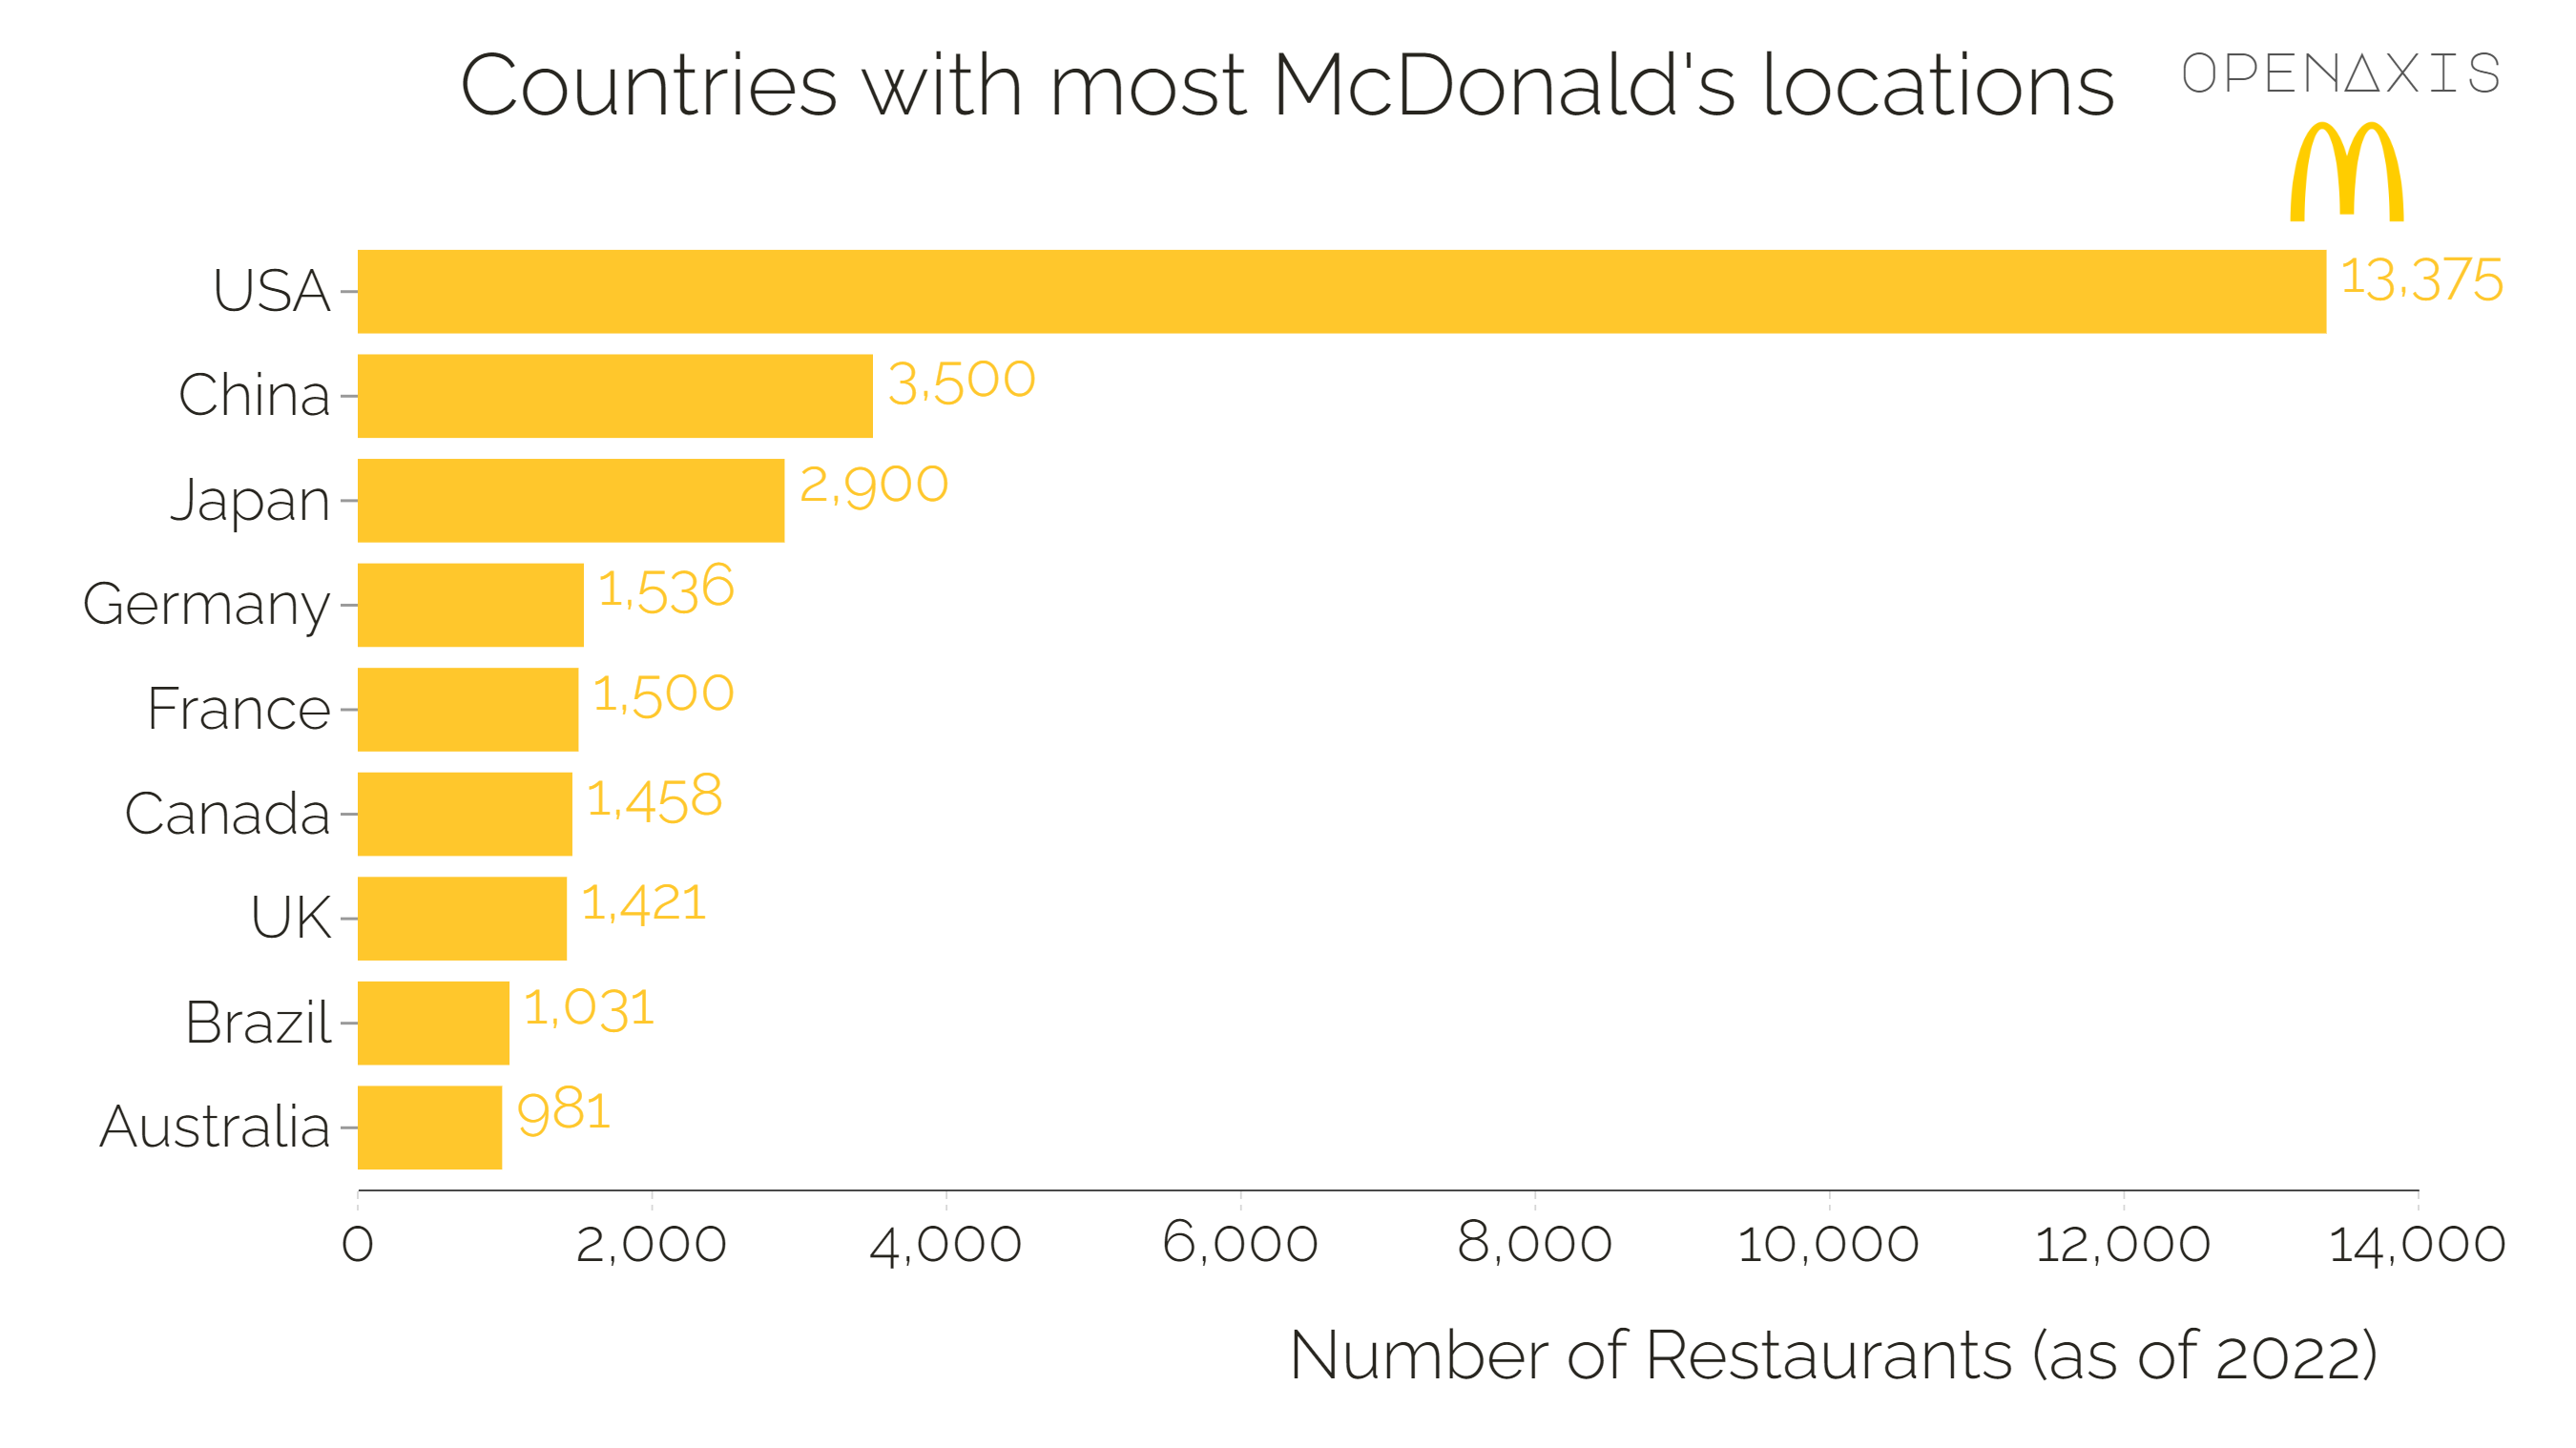 <p>The United States has the most McDonald's in the world followed by China &amp; Japan. </p><p><br /></p><p>The United States, Japan and China account for roughly 52% of the McDonald's in the world. Eight (8) countries in the world have more than 1K McDonald's.  Thirty nine (39) countries in the world have more than 100 McDonald's.</p><p><br /></p><p><span data-index="0" data-denotation-char data-id="0" data-value="&lt;a href=&quot;/search?q=%23food&quot; target=_self&gt;#food" data-link="/search?q=%23food">﻿<span contenteditable="false"><span></span><a href="/search?q=%23food" target="_self">#food</a></span>﻿</span> </p><p><br /></p><p>Source: <a href="/data/3740" target="_blank">McDonald's, Wikipedia</a></p><p><br /></p>